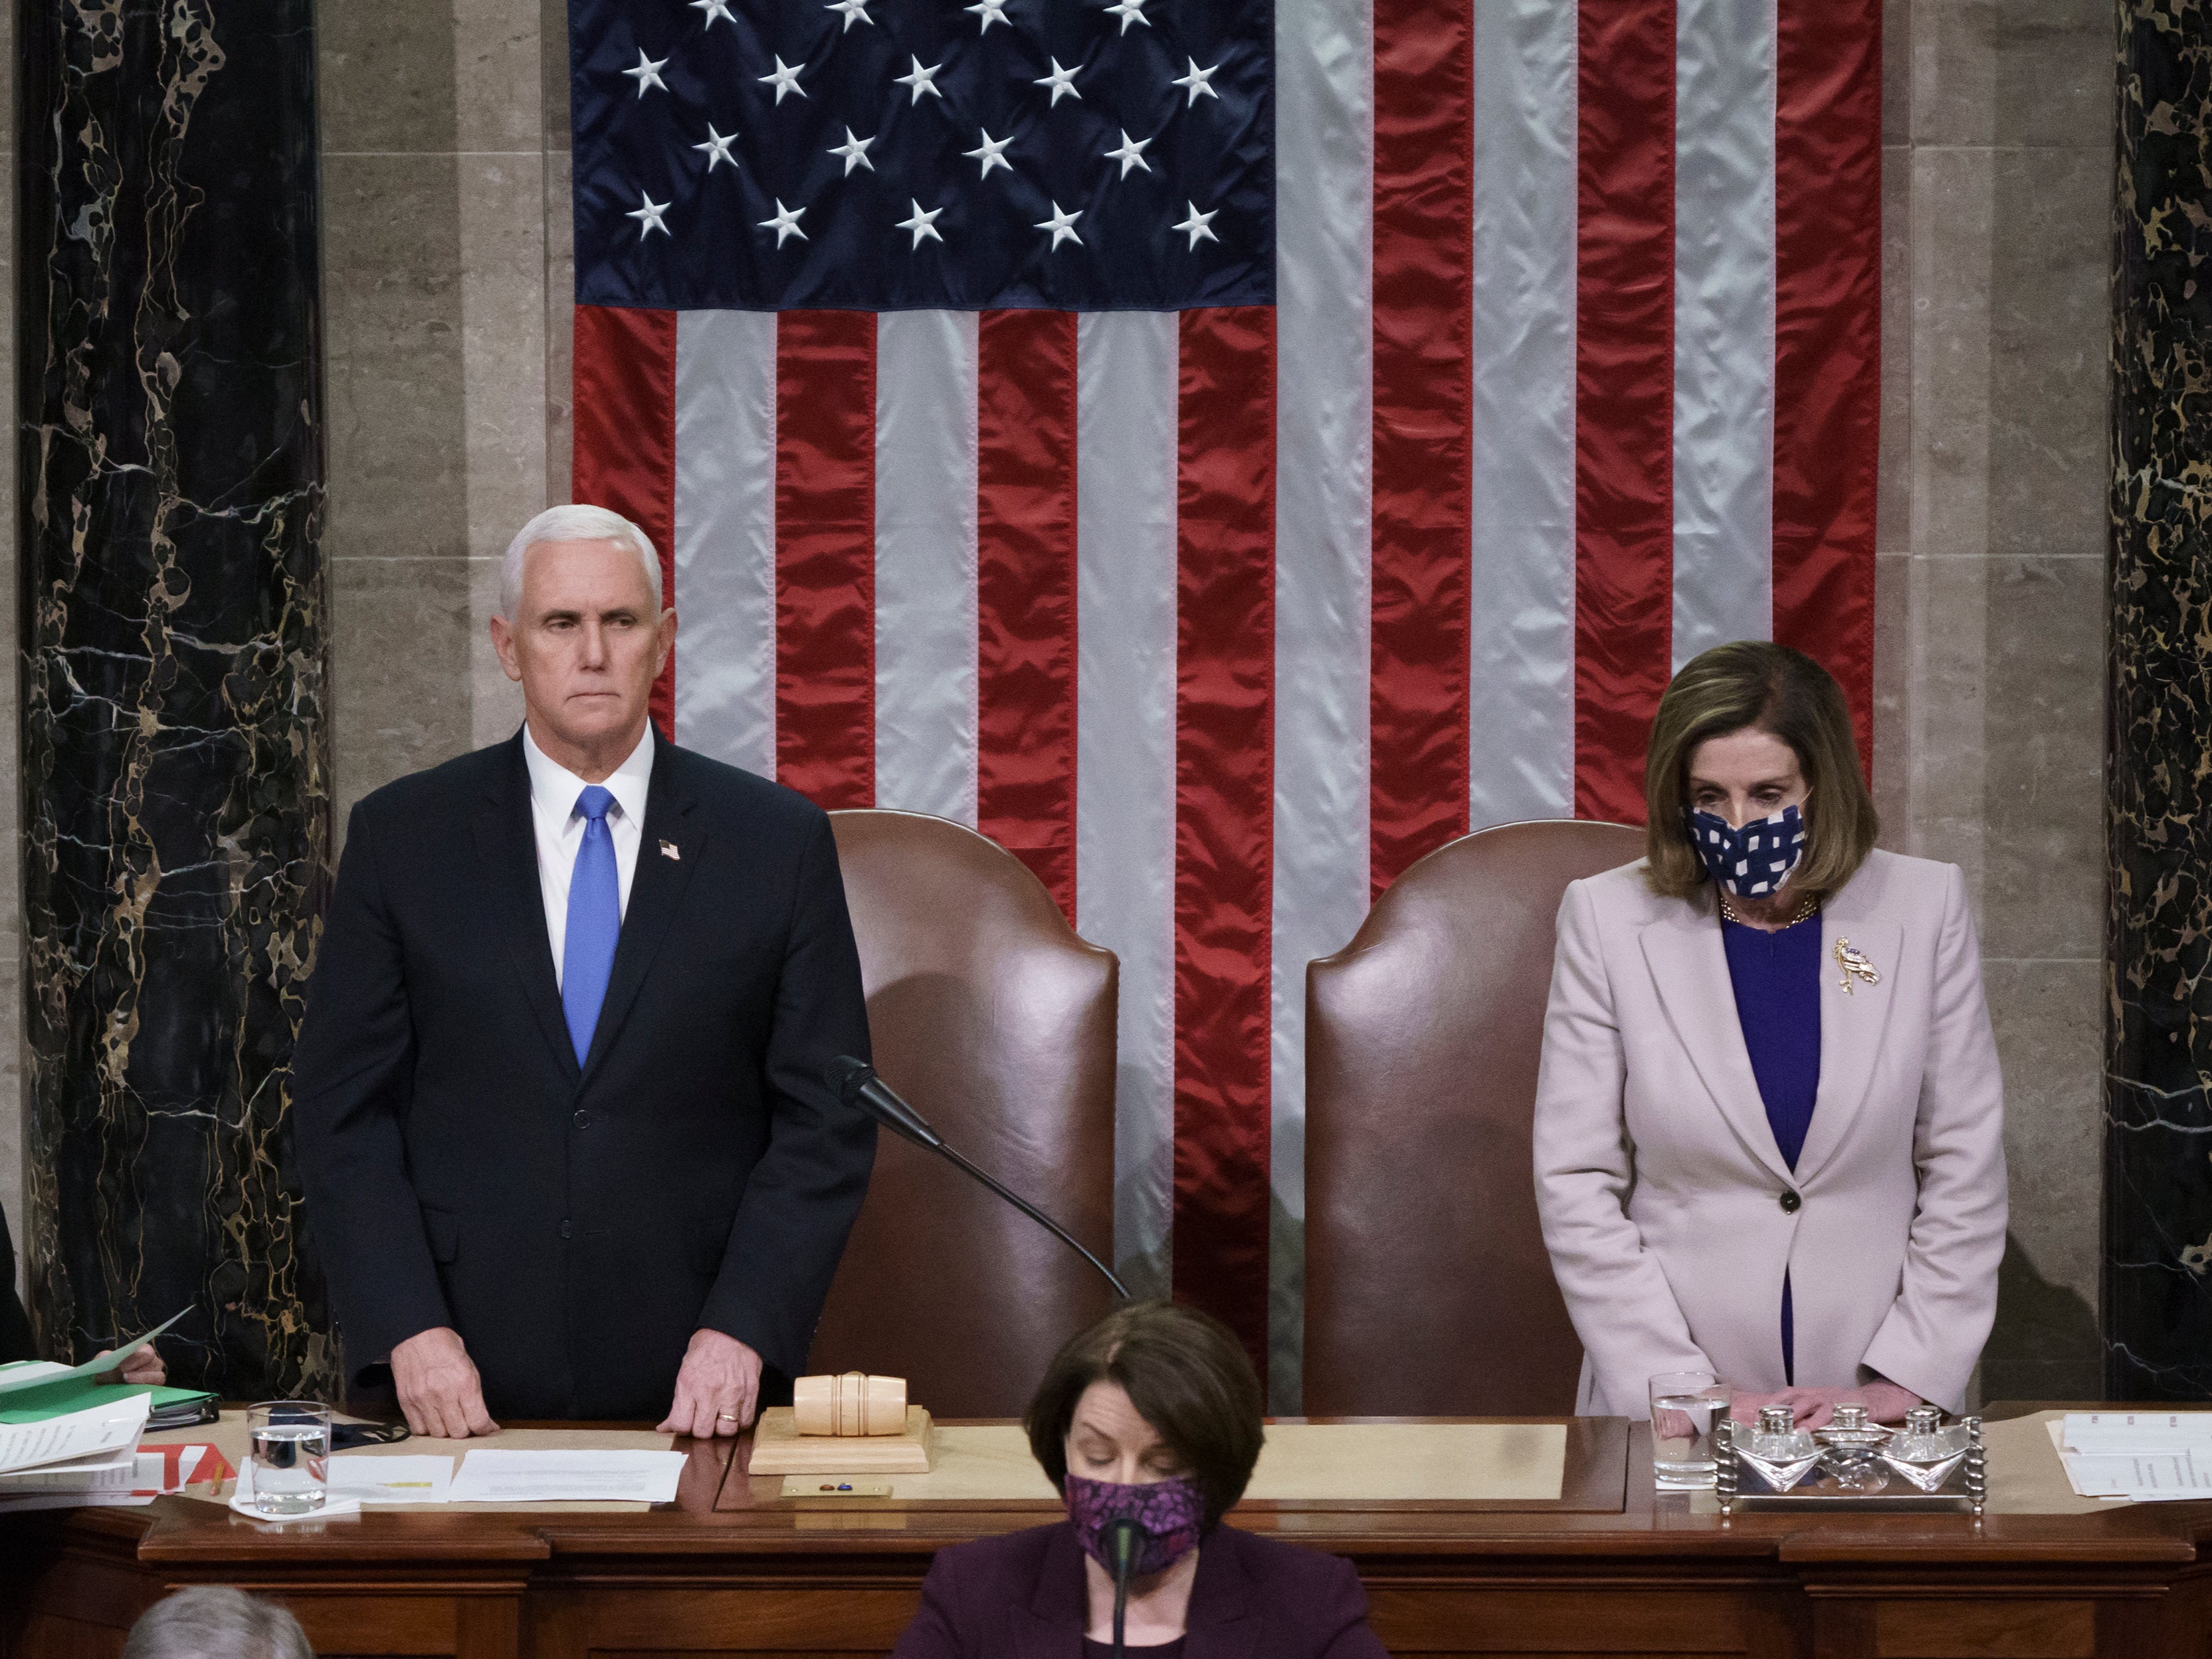 Vice President Mike Pence and Speaker of the House Nancy Pelosi read the final certification of Electoral College votes cast in November’s presidential election during a joint session of Congress, after working through the night, at the Capitol on 7 January 2021 in Washington, DC